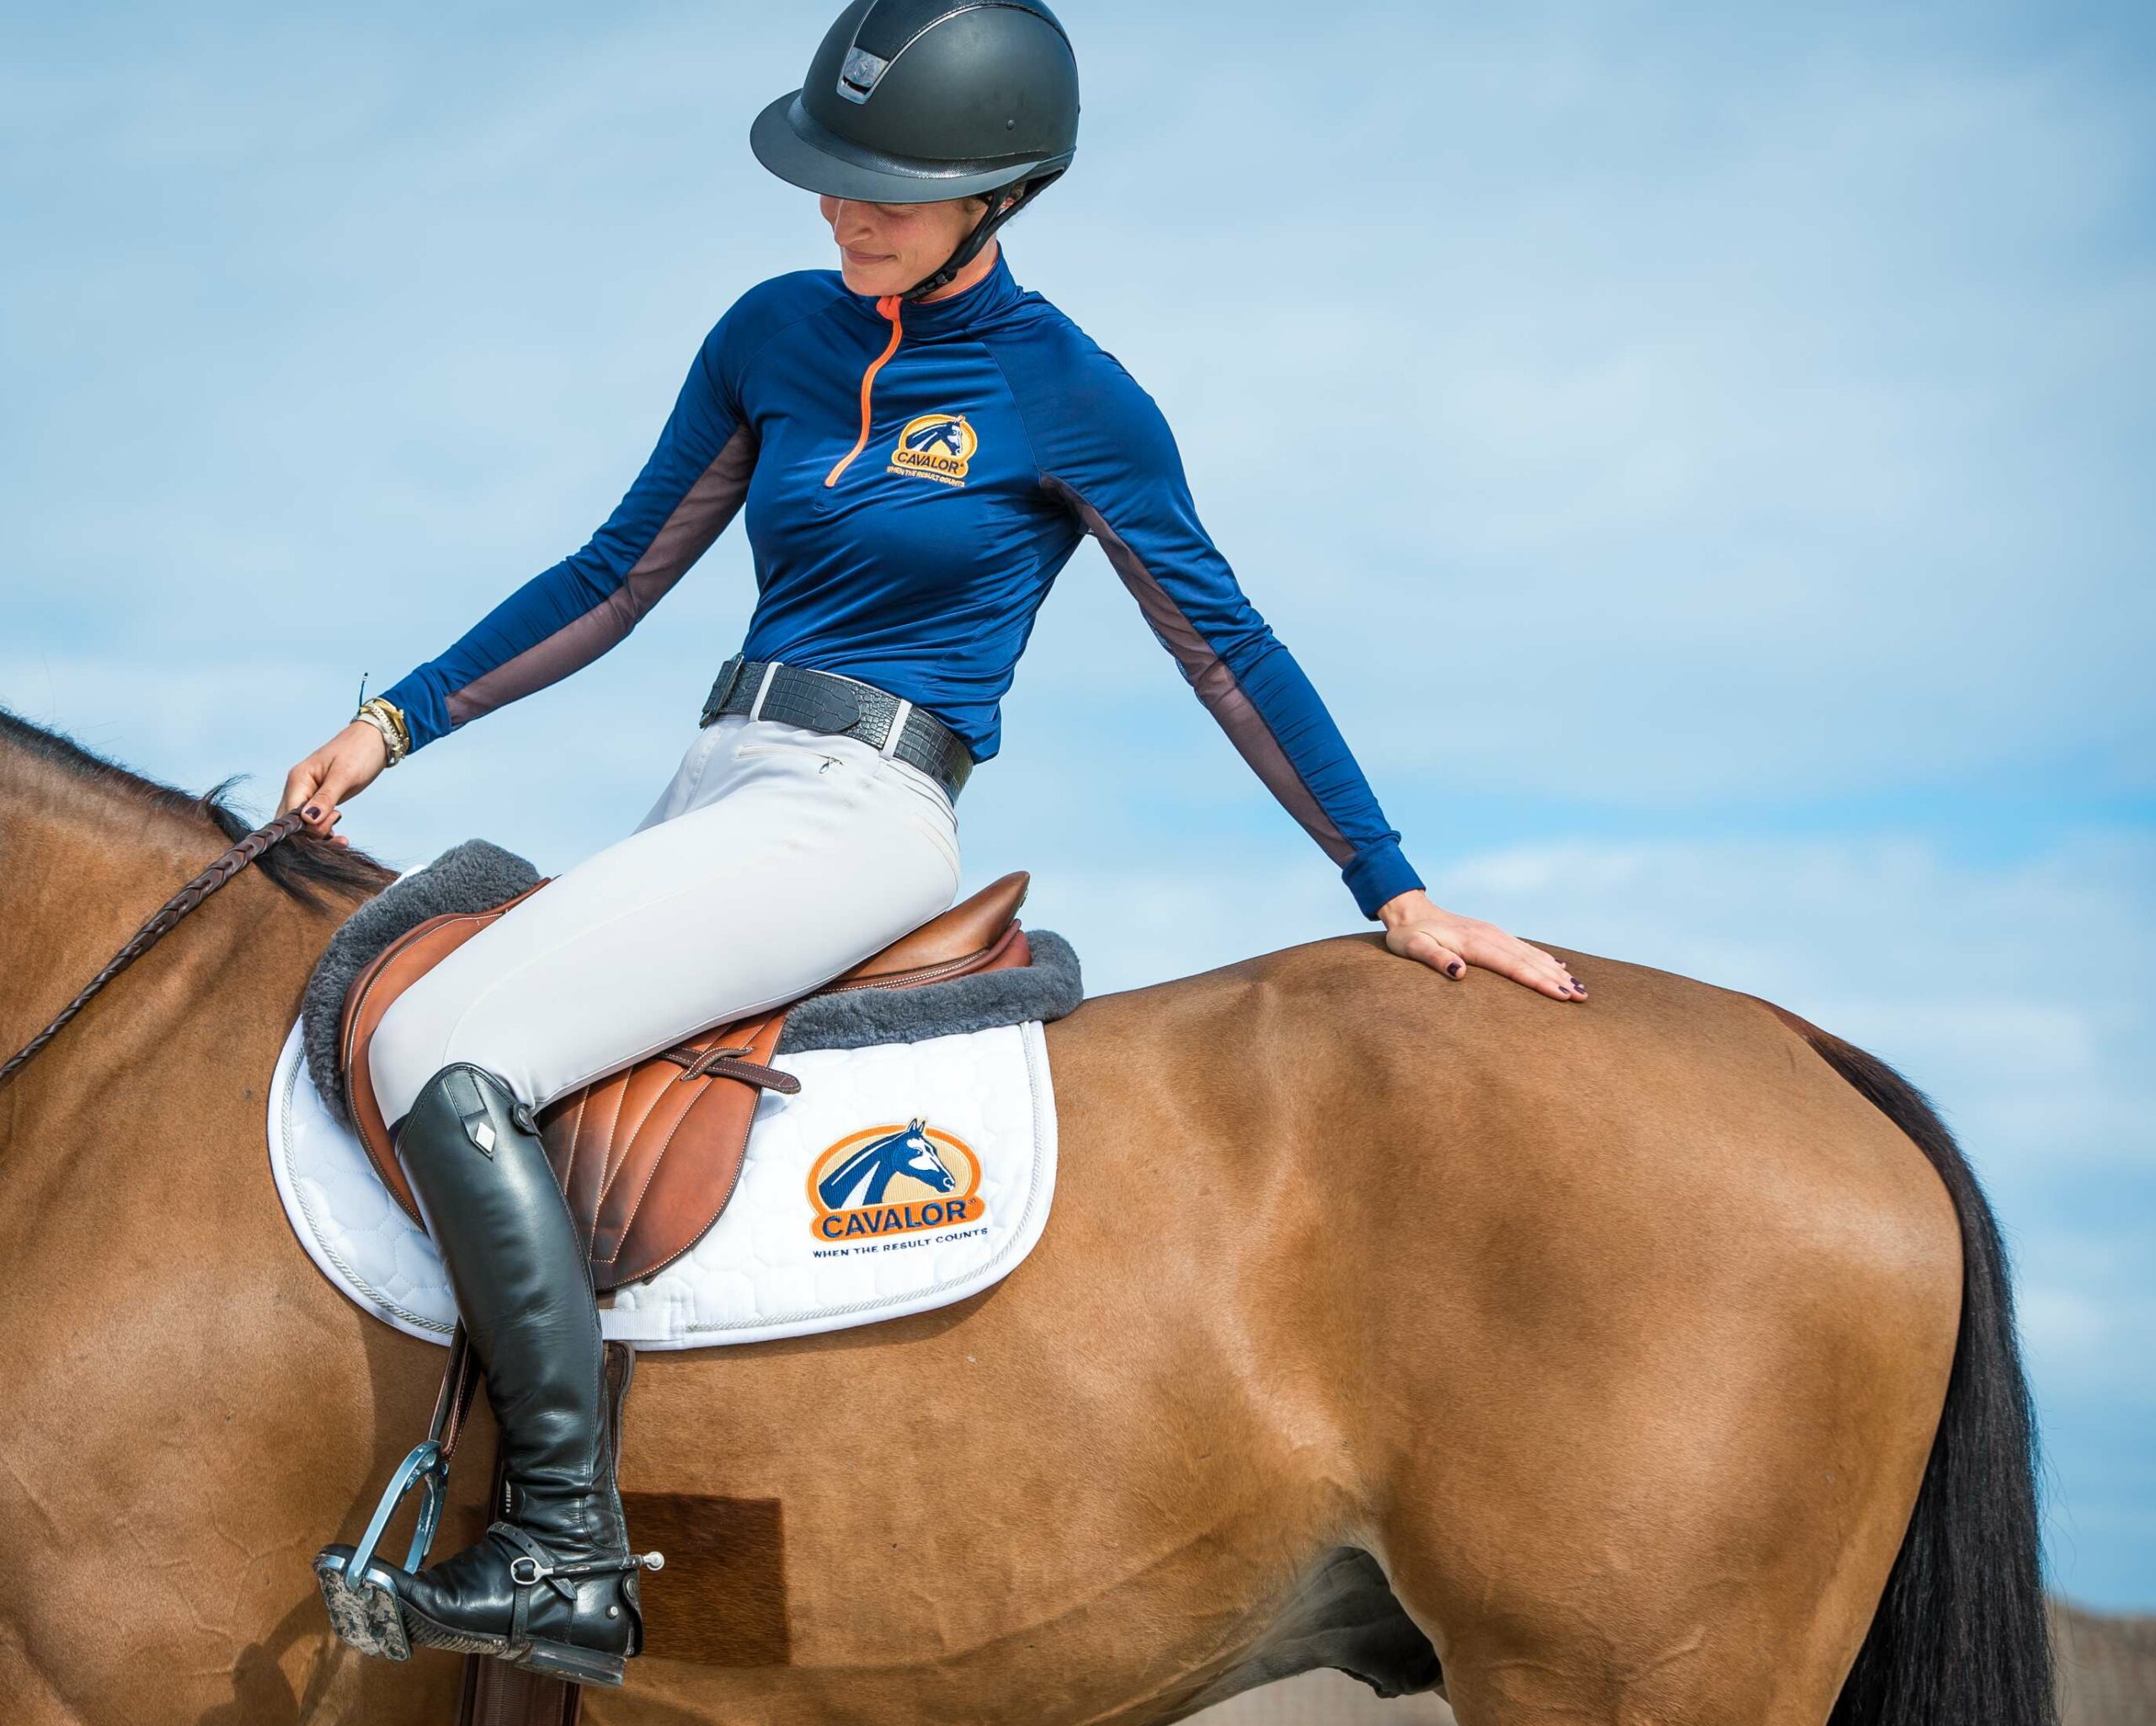 Regulating your horse’s energy